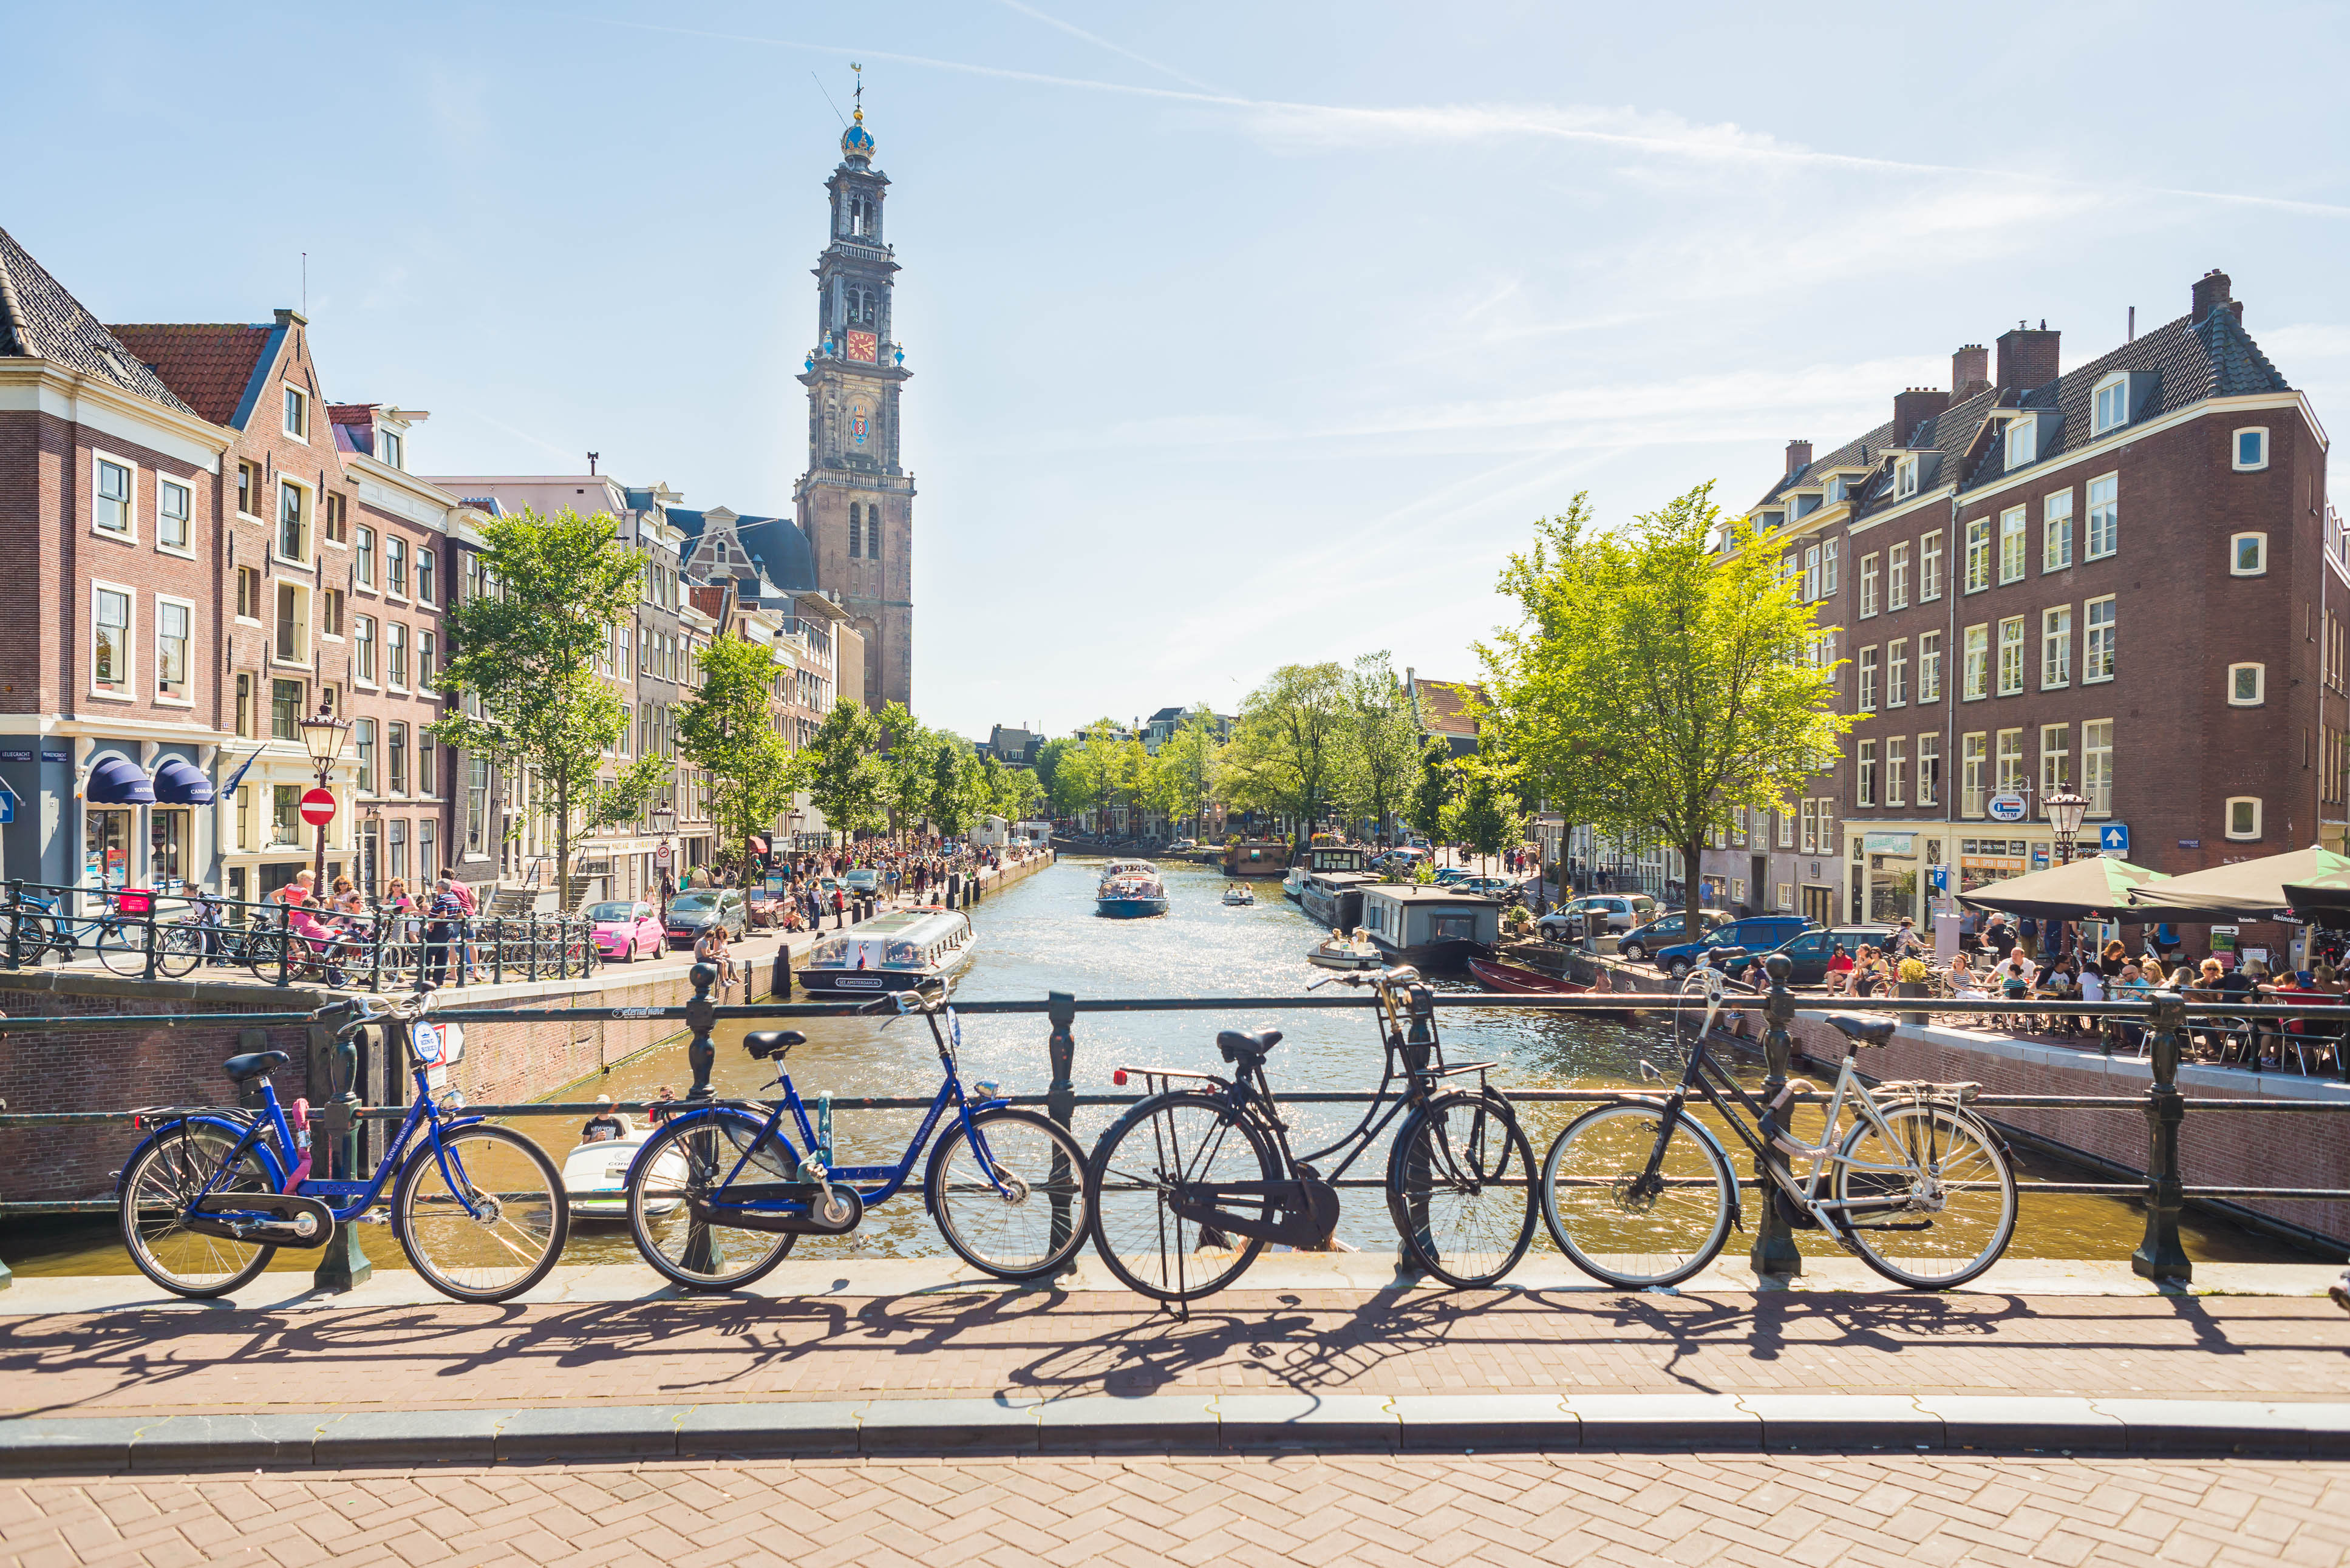 Bicycles are part of the typical cityscape of Amsterdam